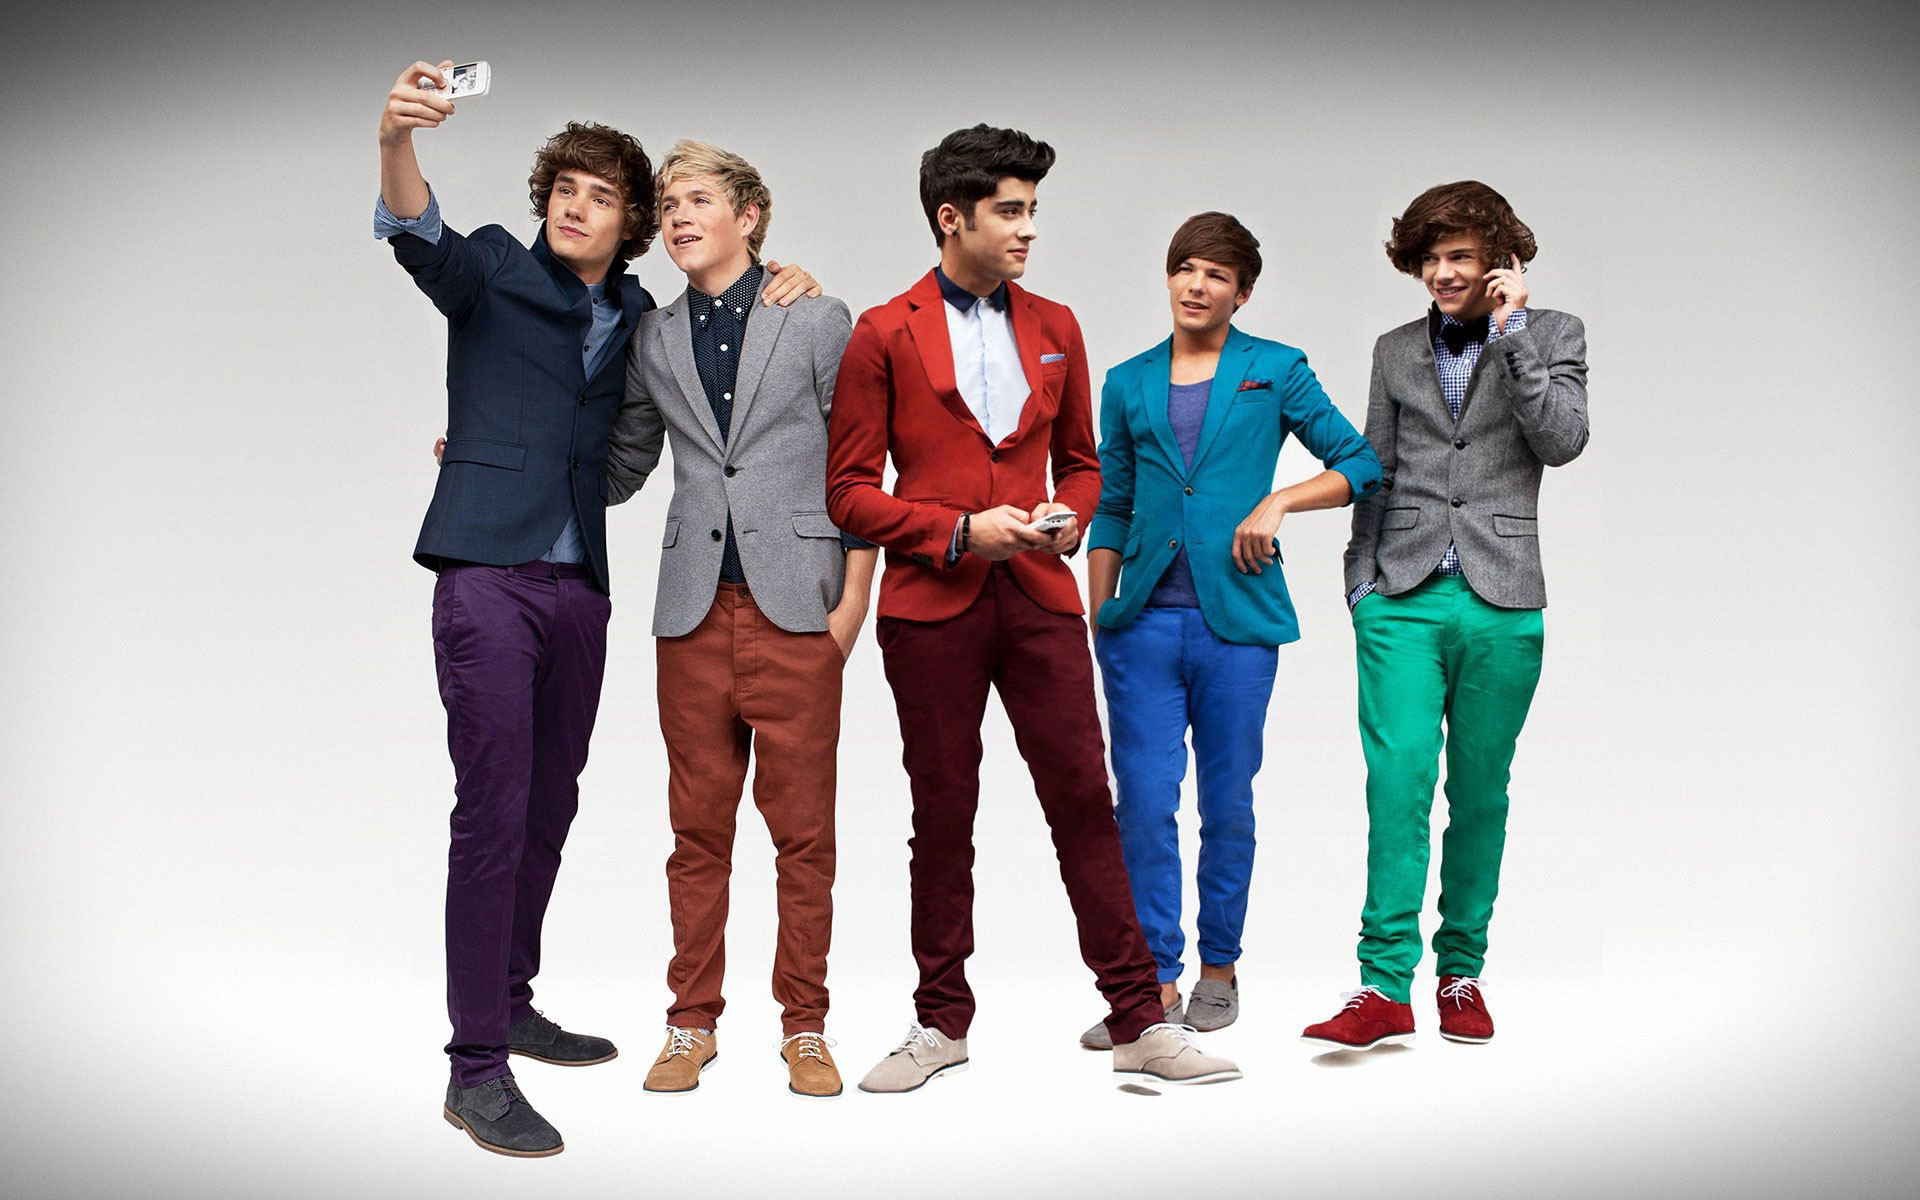 1920x1200 One Direction Pictures Wallpapers (50 Wallpapers)